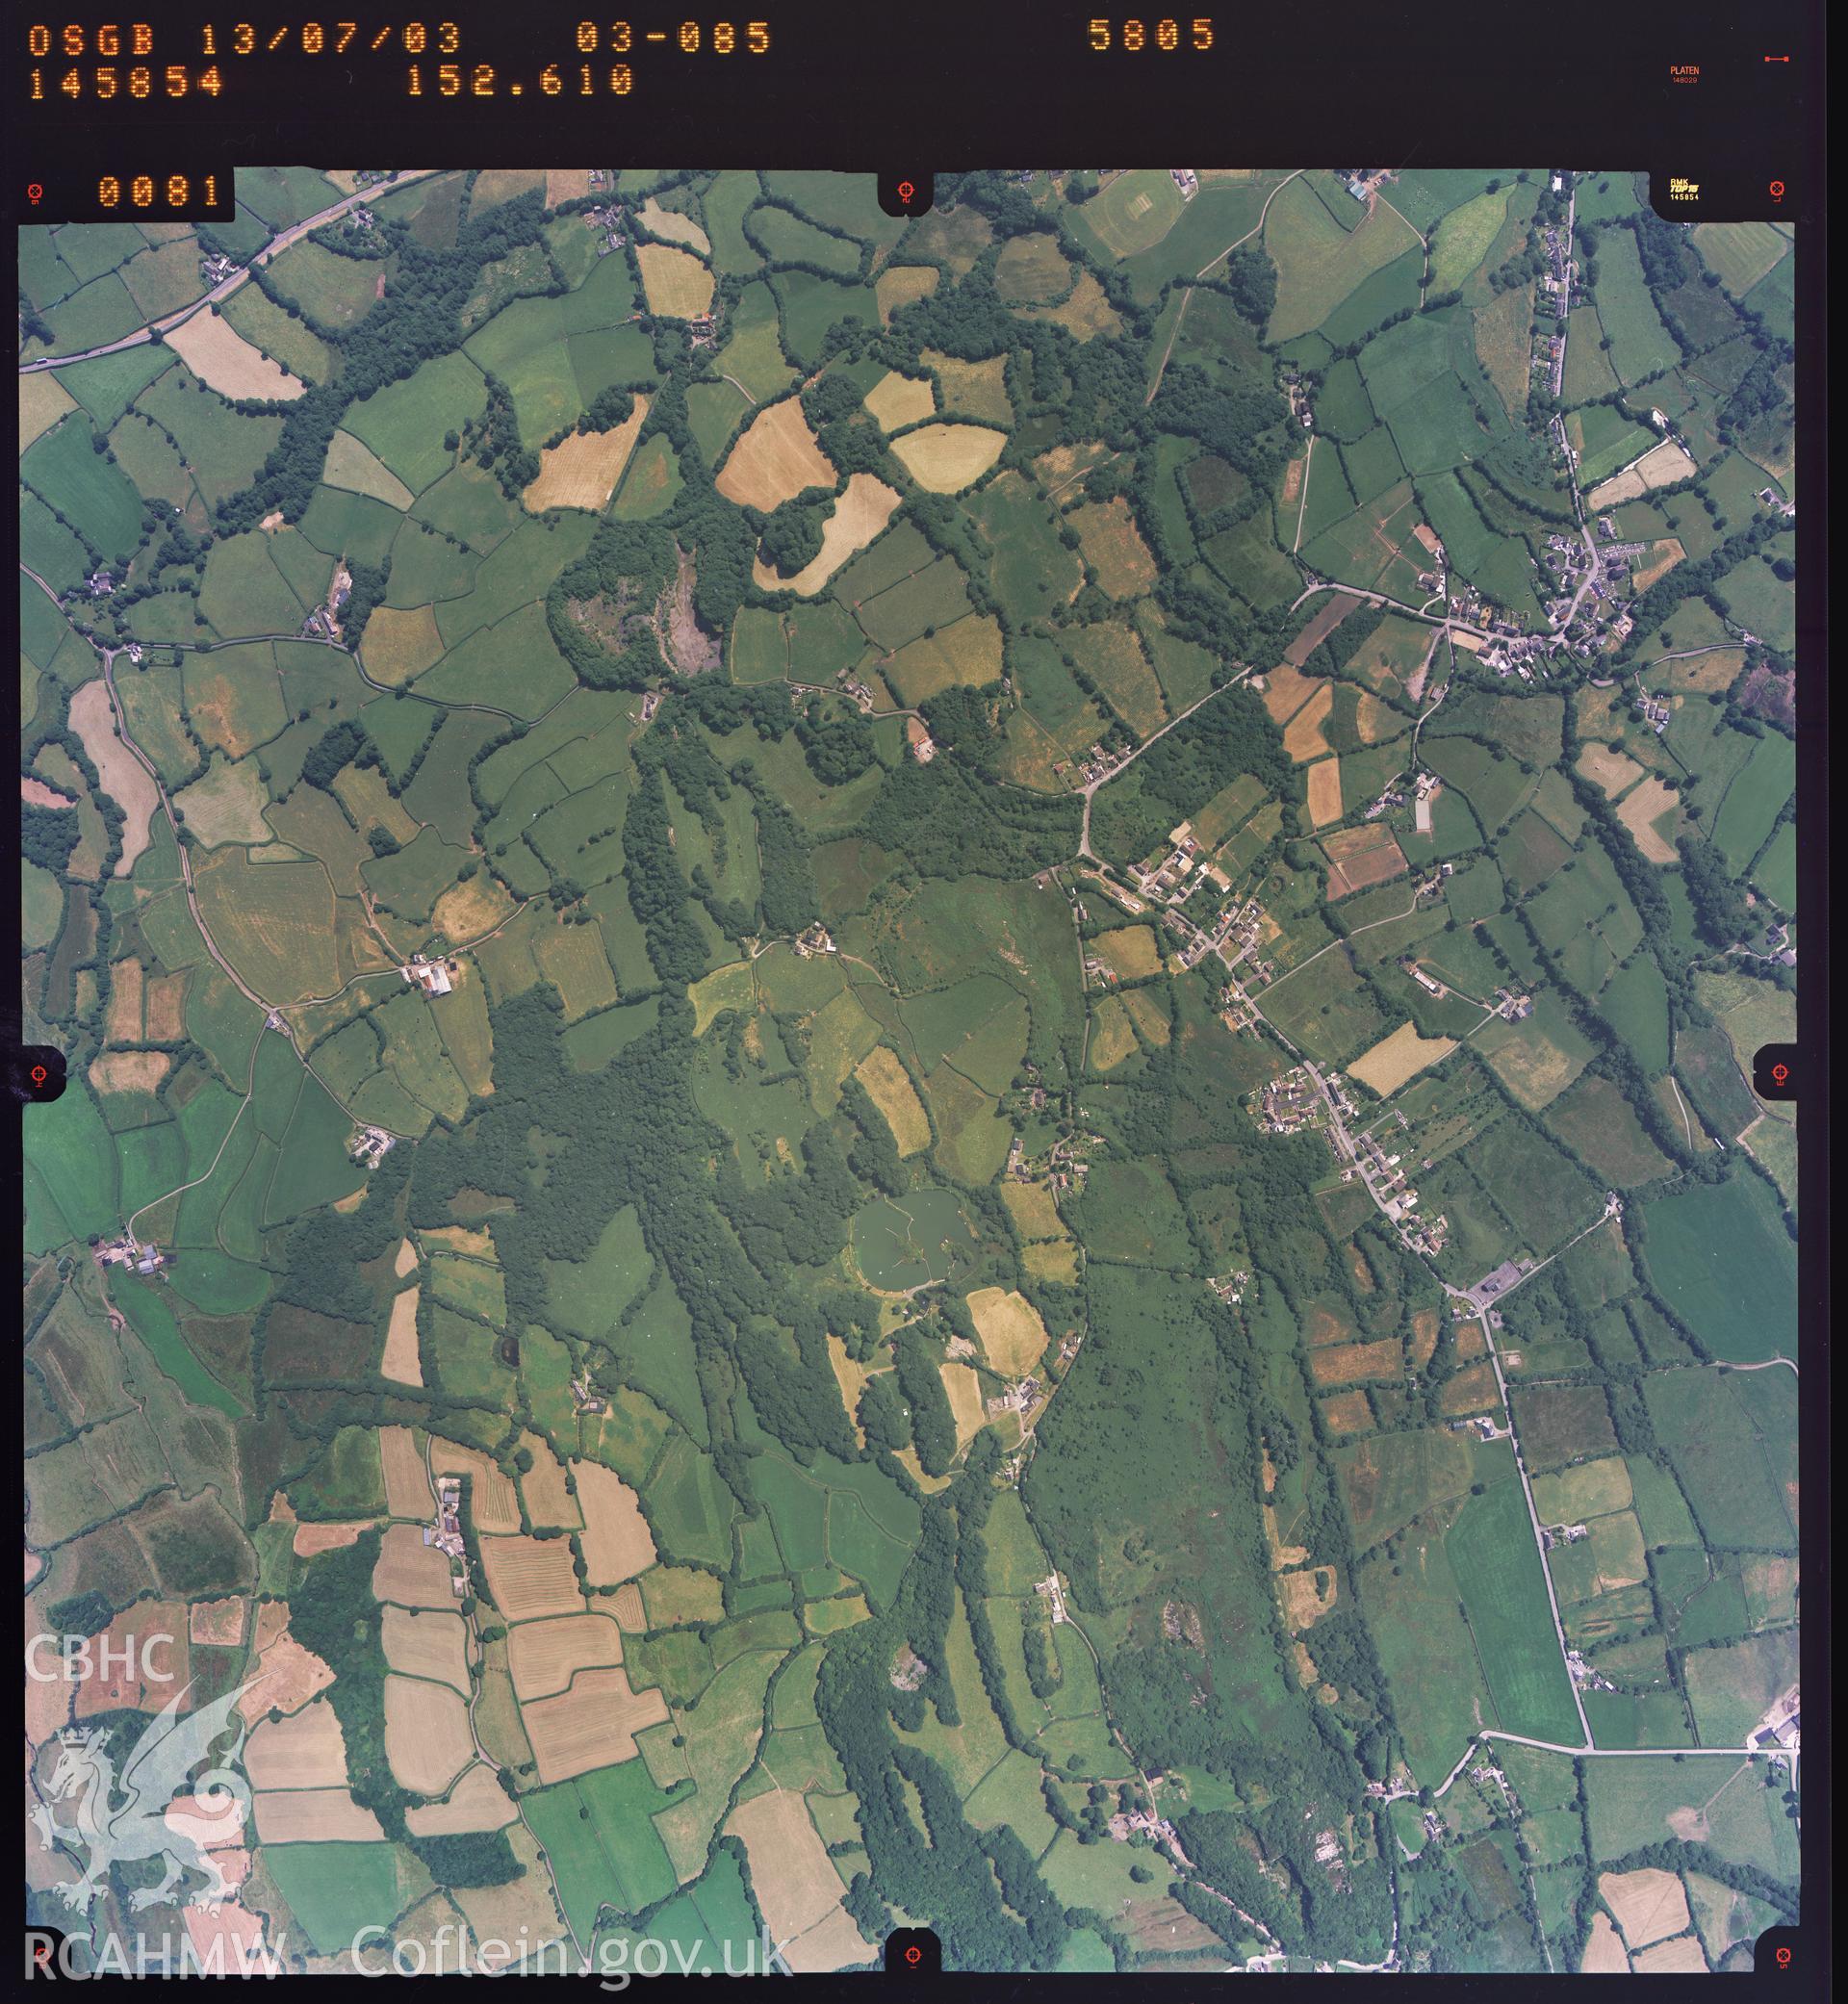 Digitized copy of a colour aerial photograph showing the area west of Drefach, taken by Ordnance Survey, 2003.